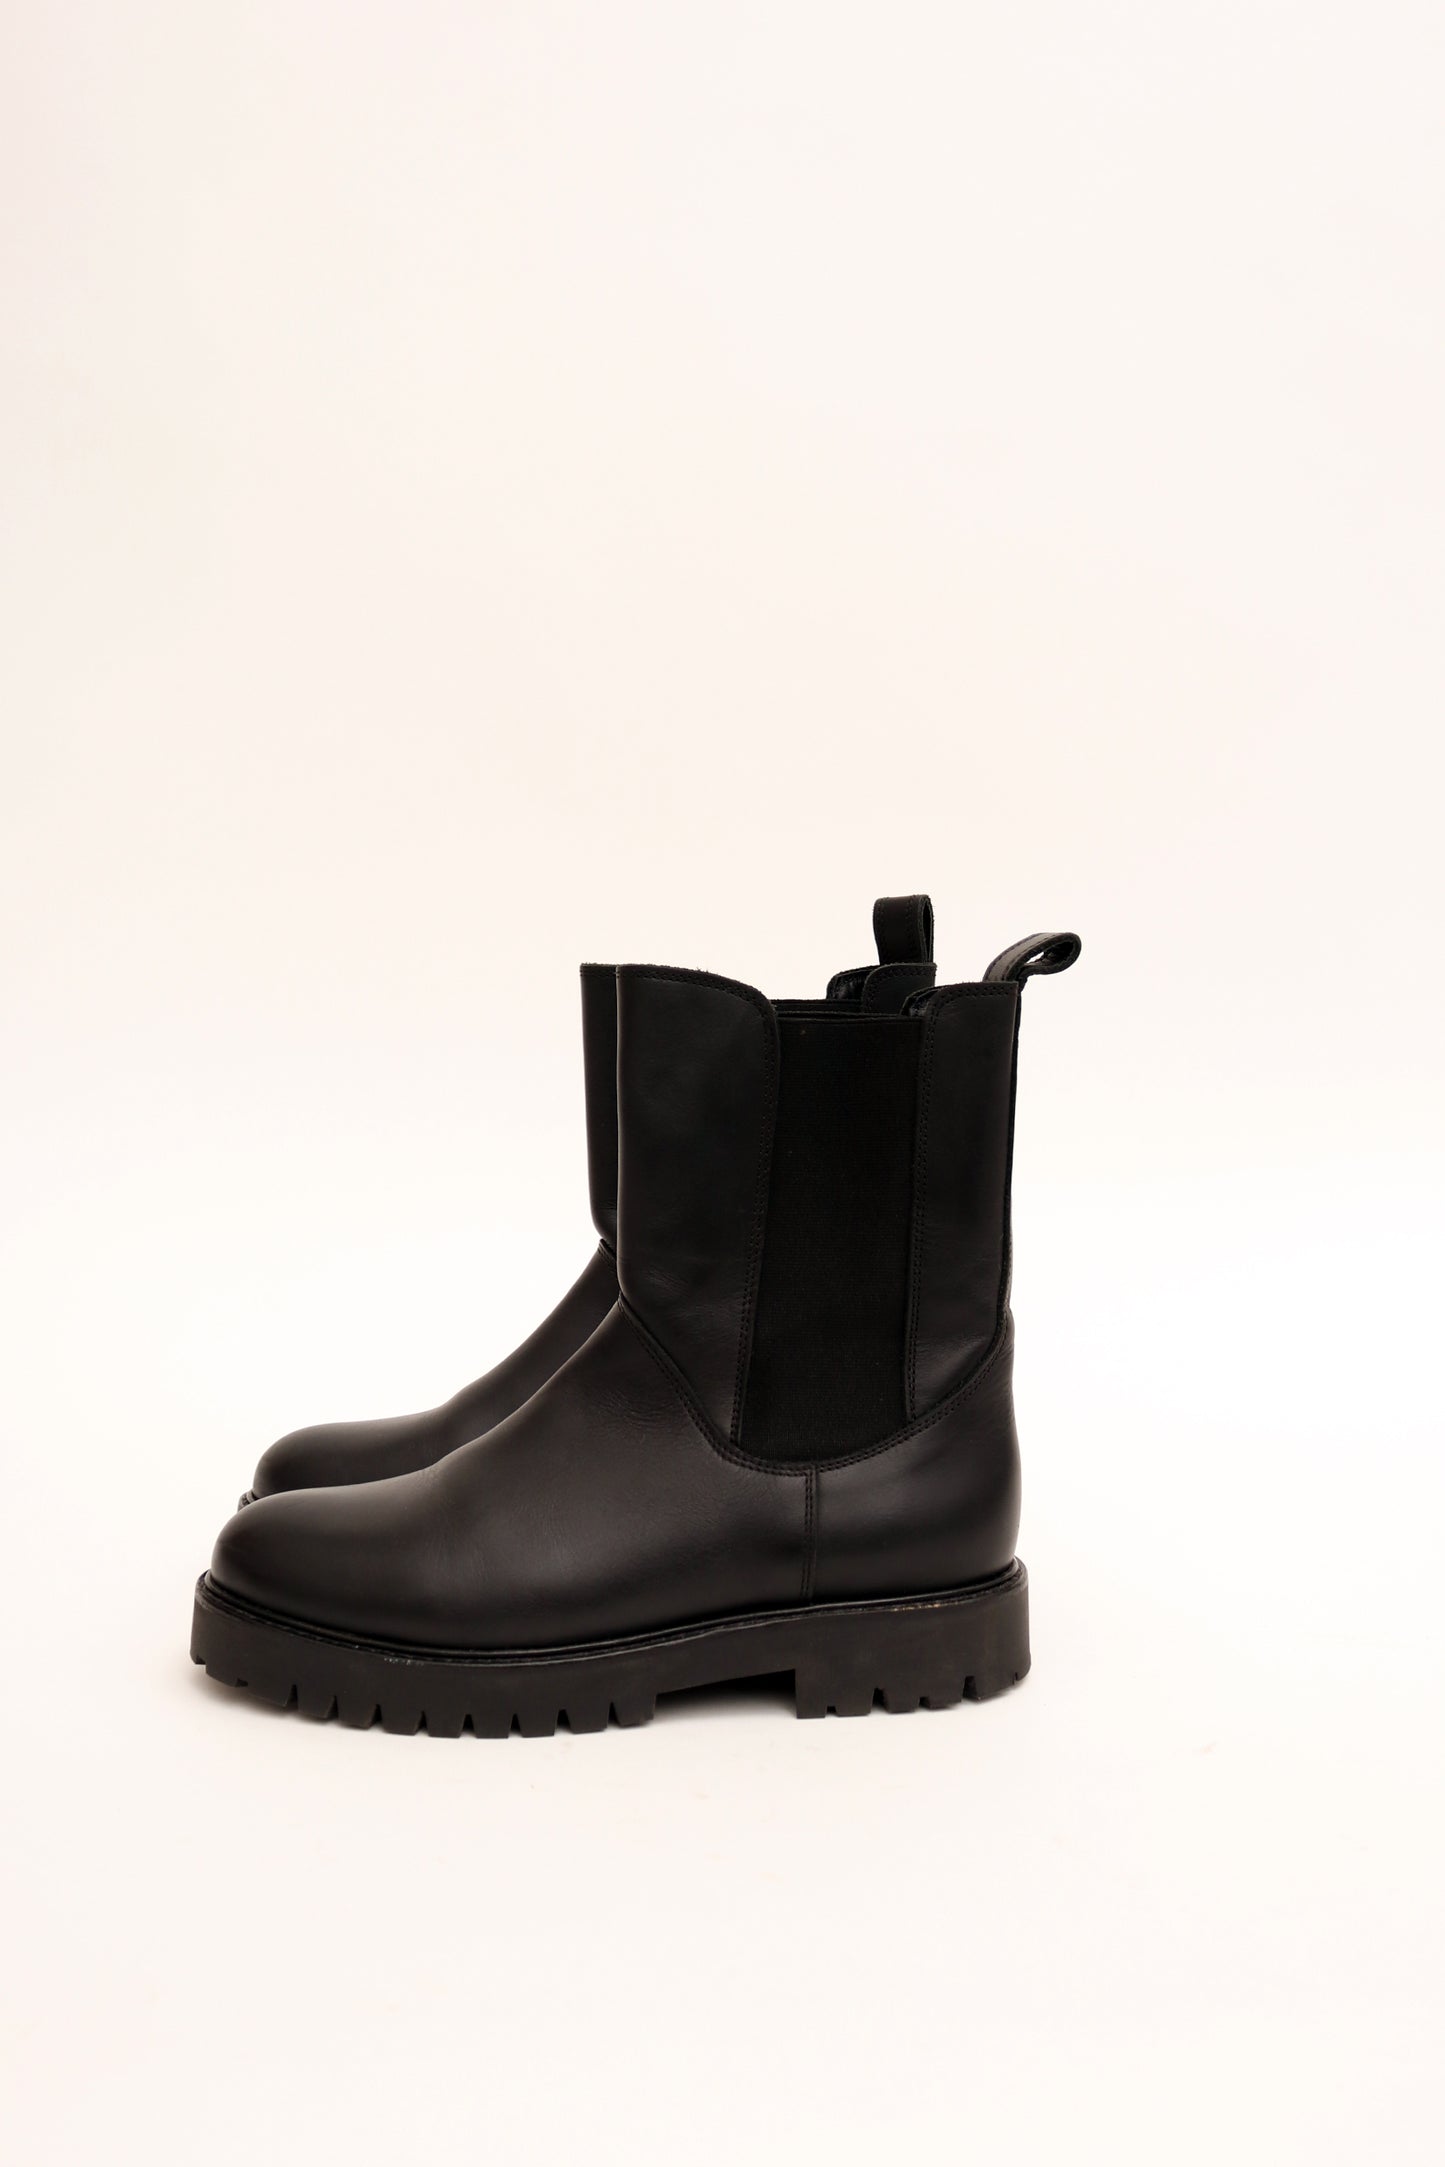 COS High Leather Chelsea Boots